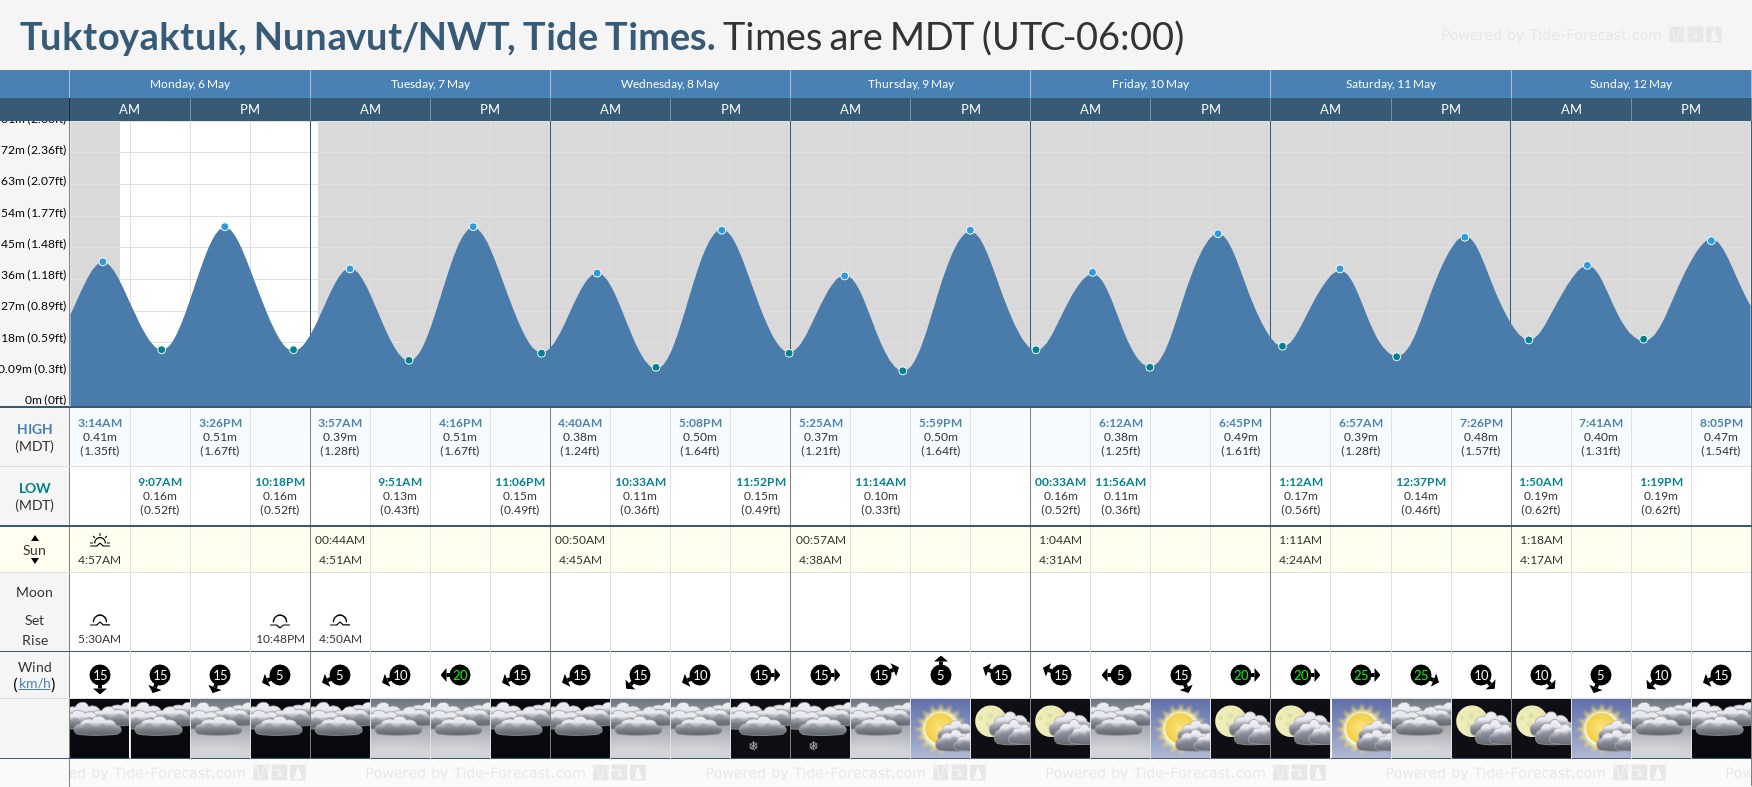 Tuktoyaktuk, Nunavut/NWT Tide Chart including high and low tide tide times for the next 7 days